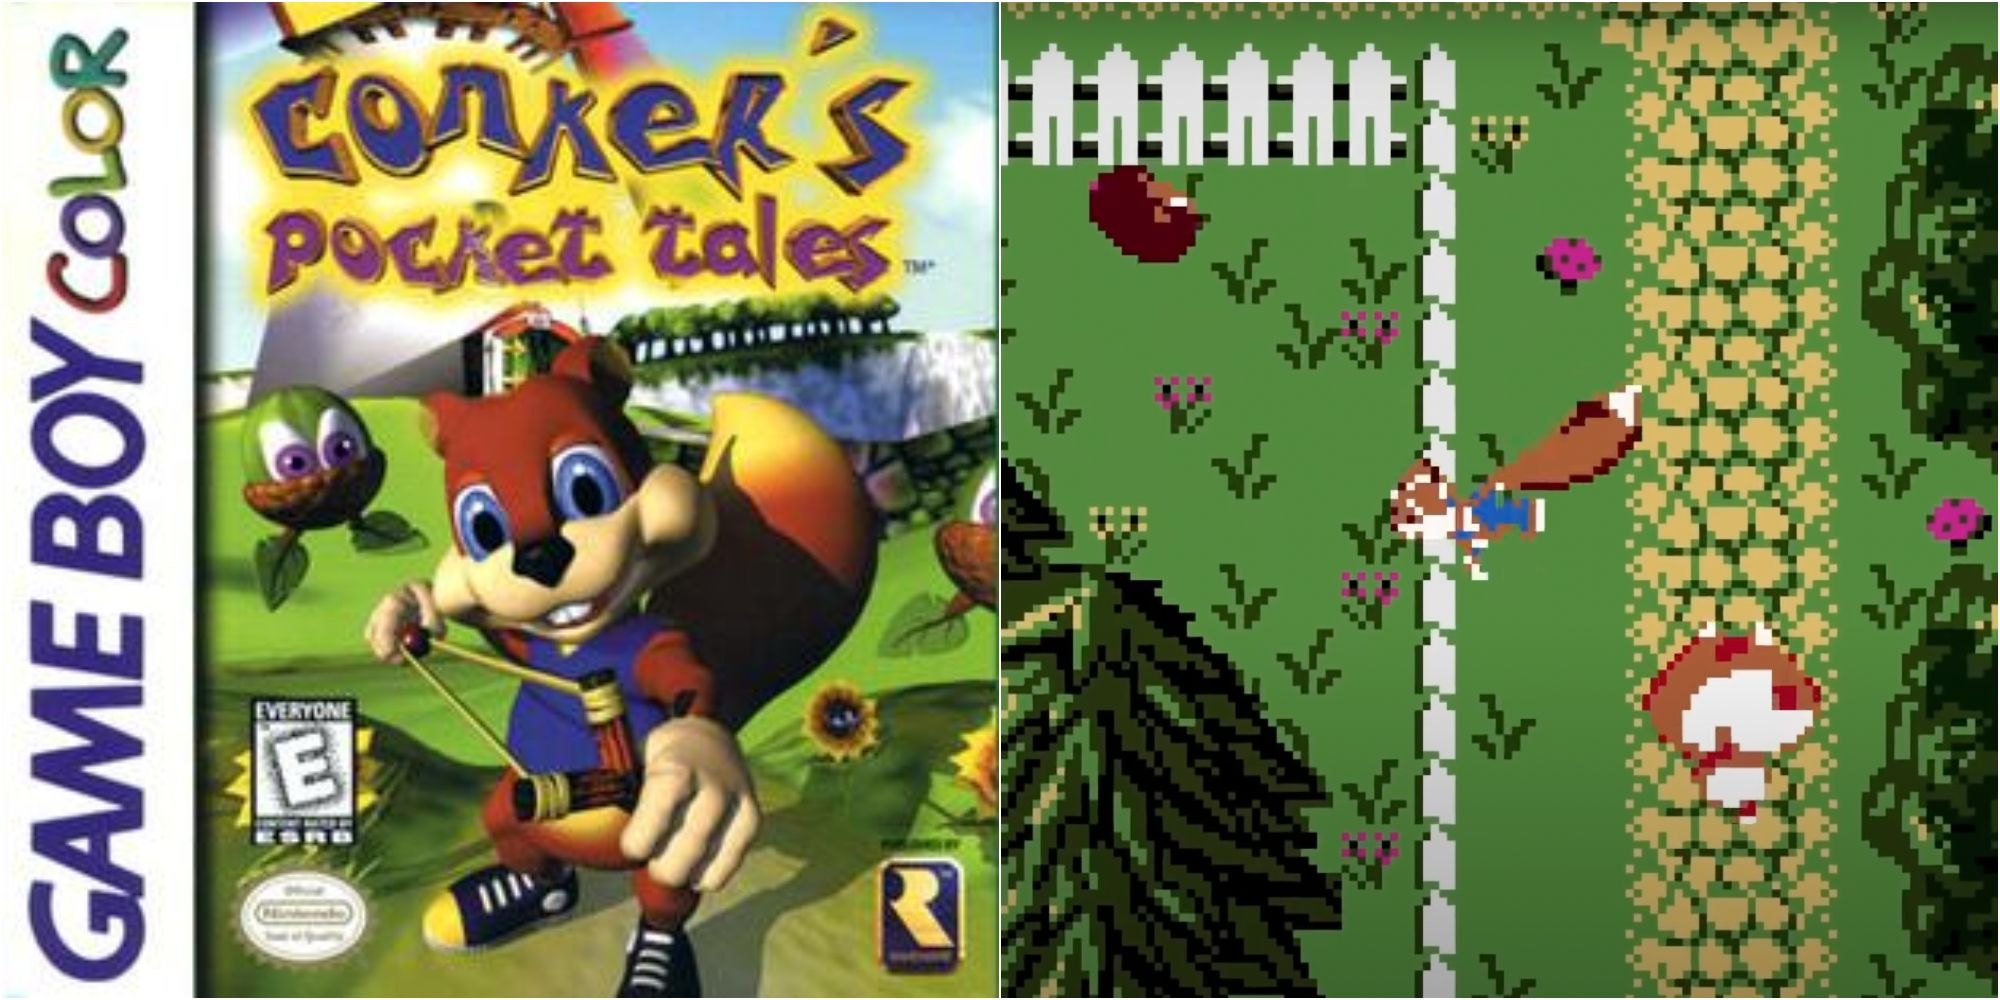 Conker's pocket tales's Game Boy Color box art, beside a top-down view of a squirrel in a blue jumper running through a field